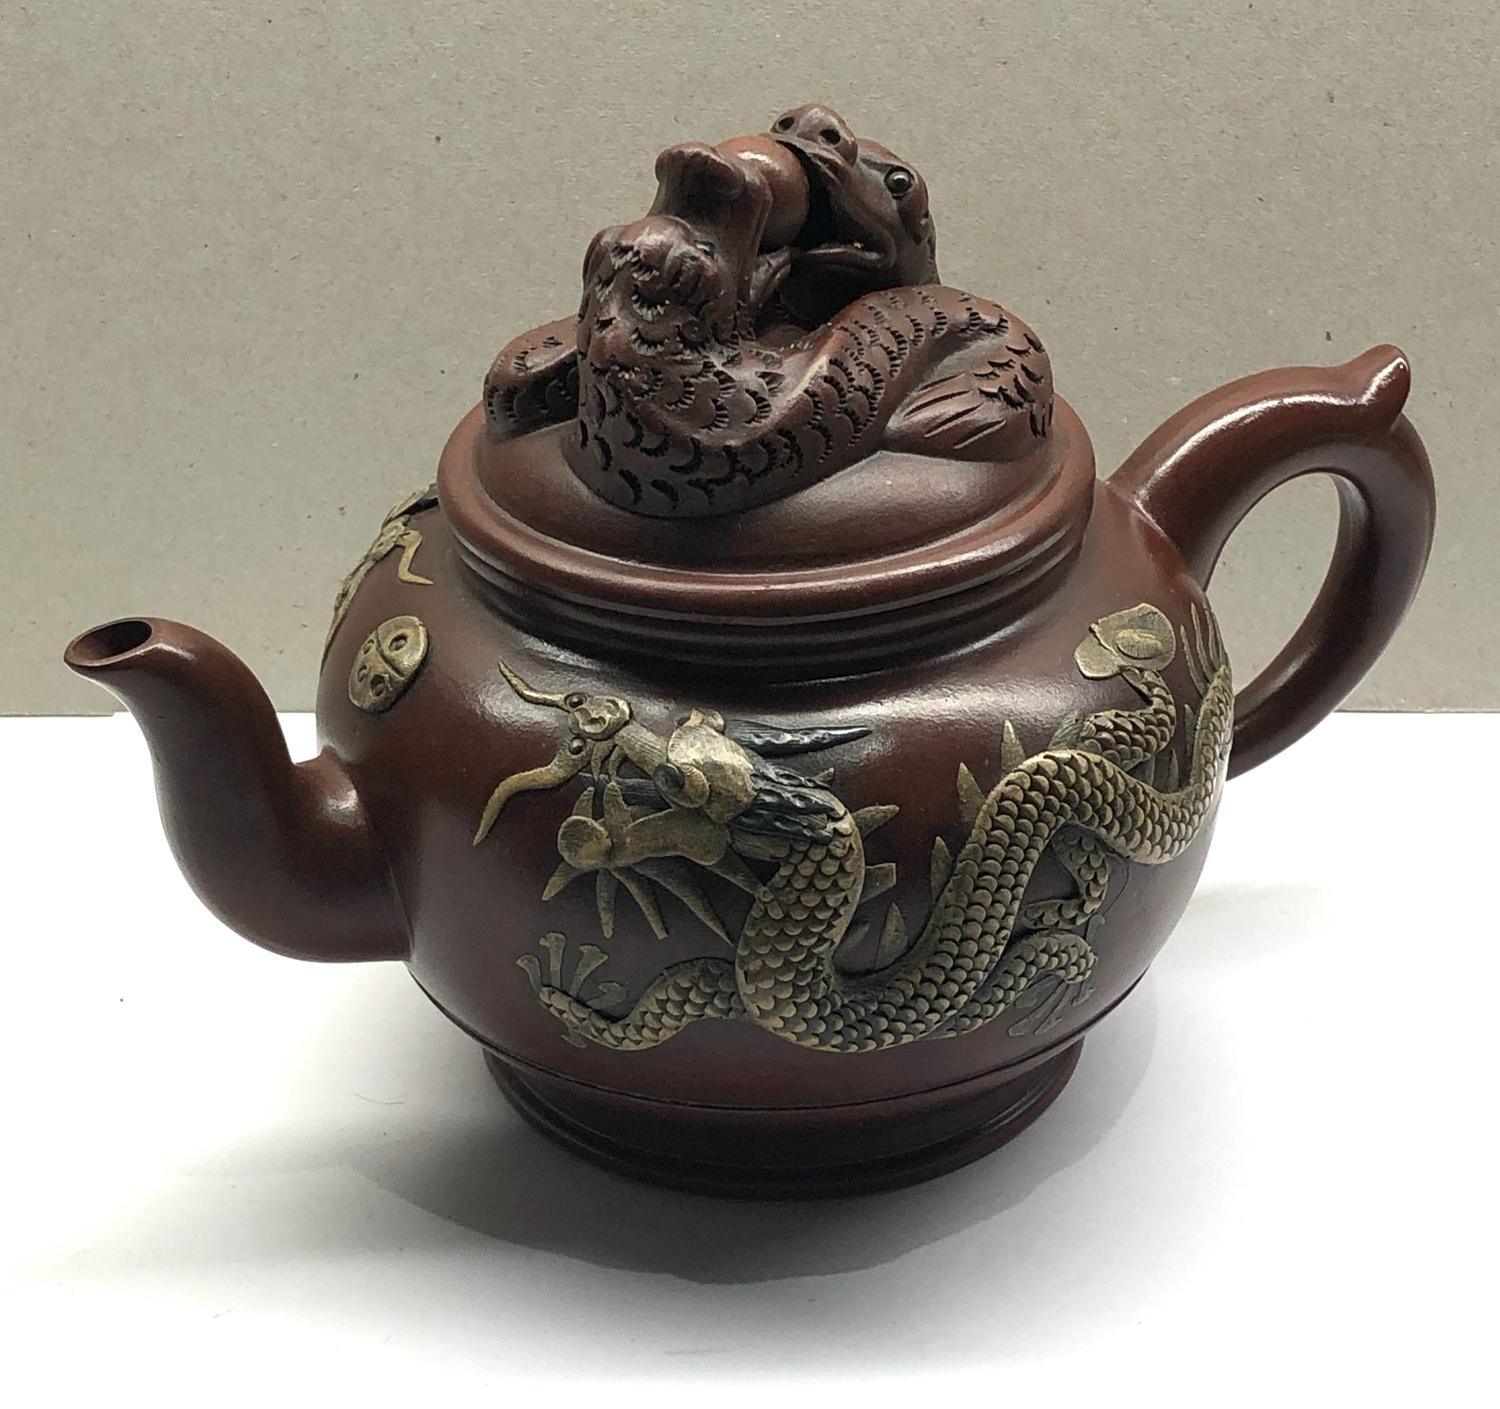 Chinese stone ware dragon teapot - Image 3 of 4